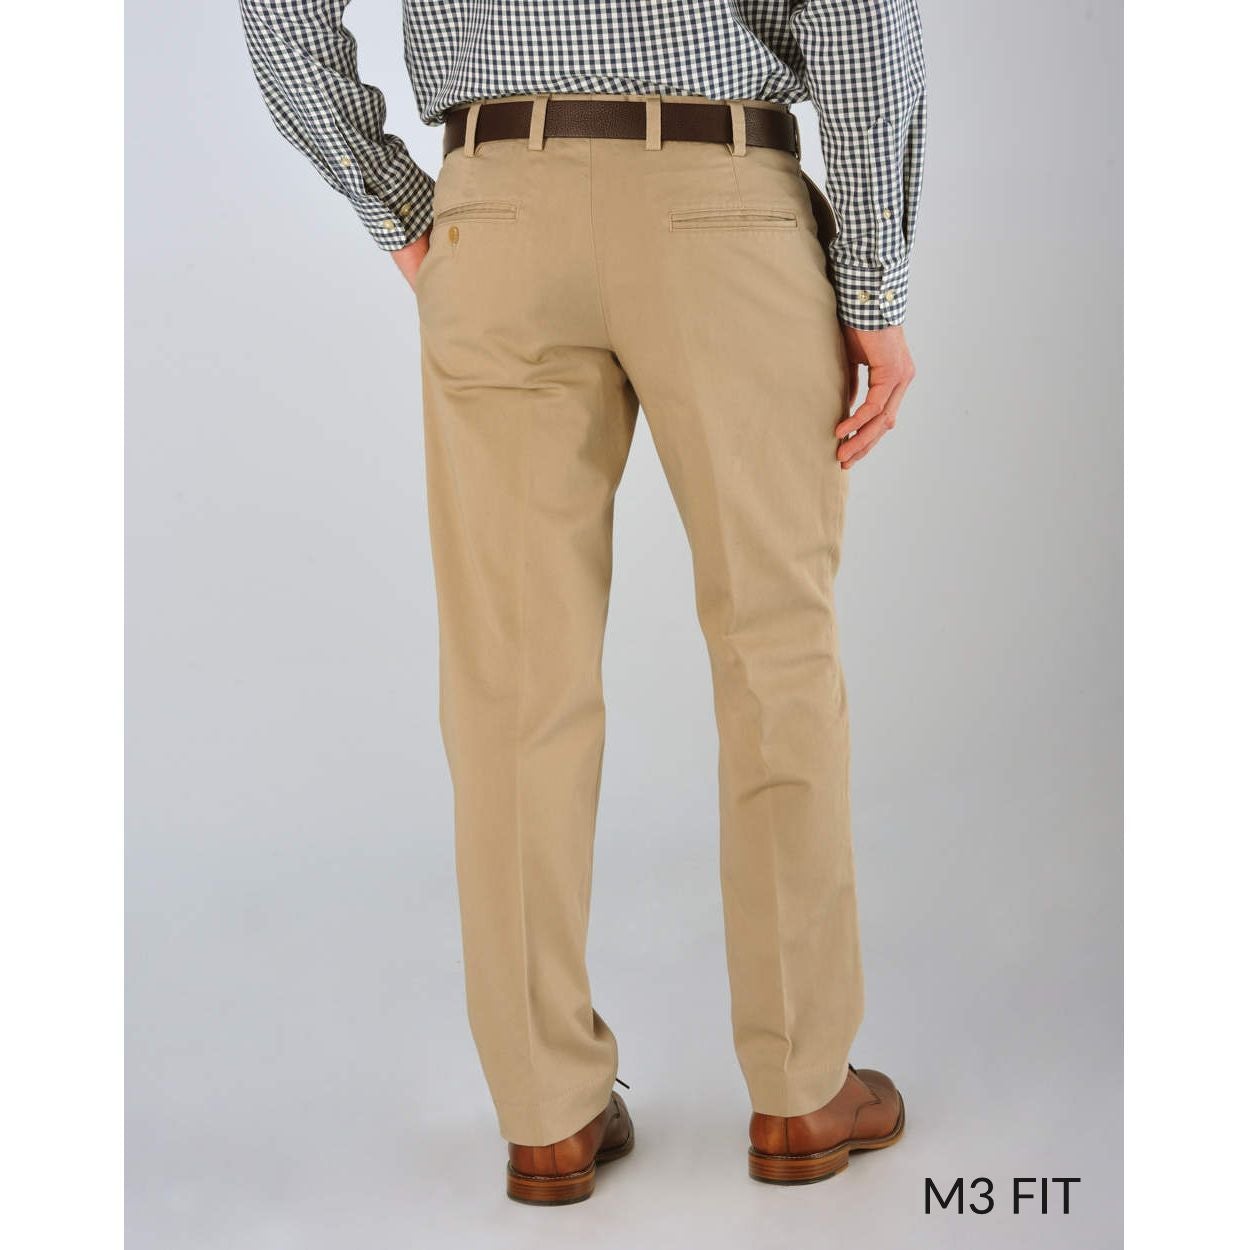 M3 Straight Fit T400 Comfort Stretch Twills in Oyster (Size 31 x 30) by Bills Khakis